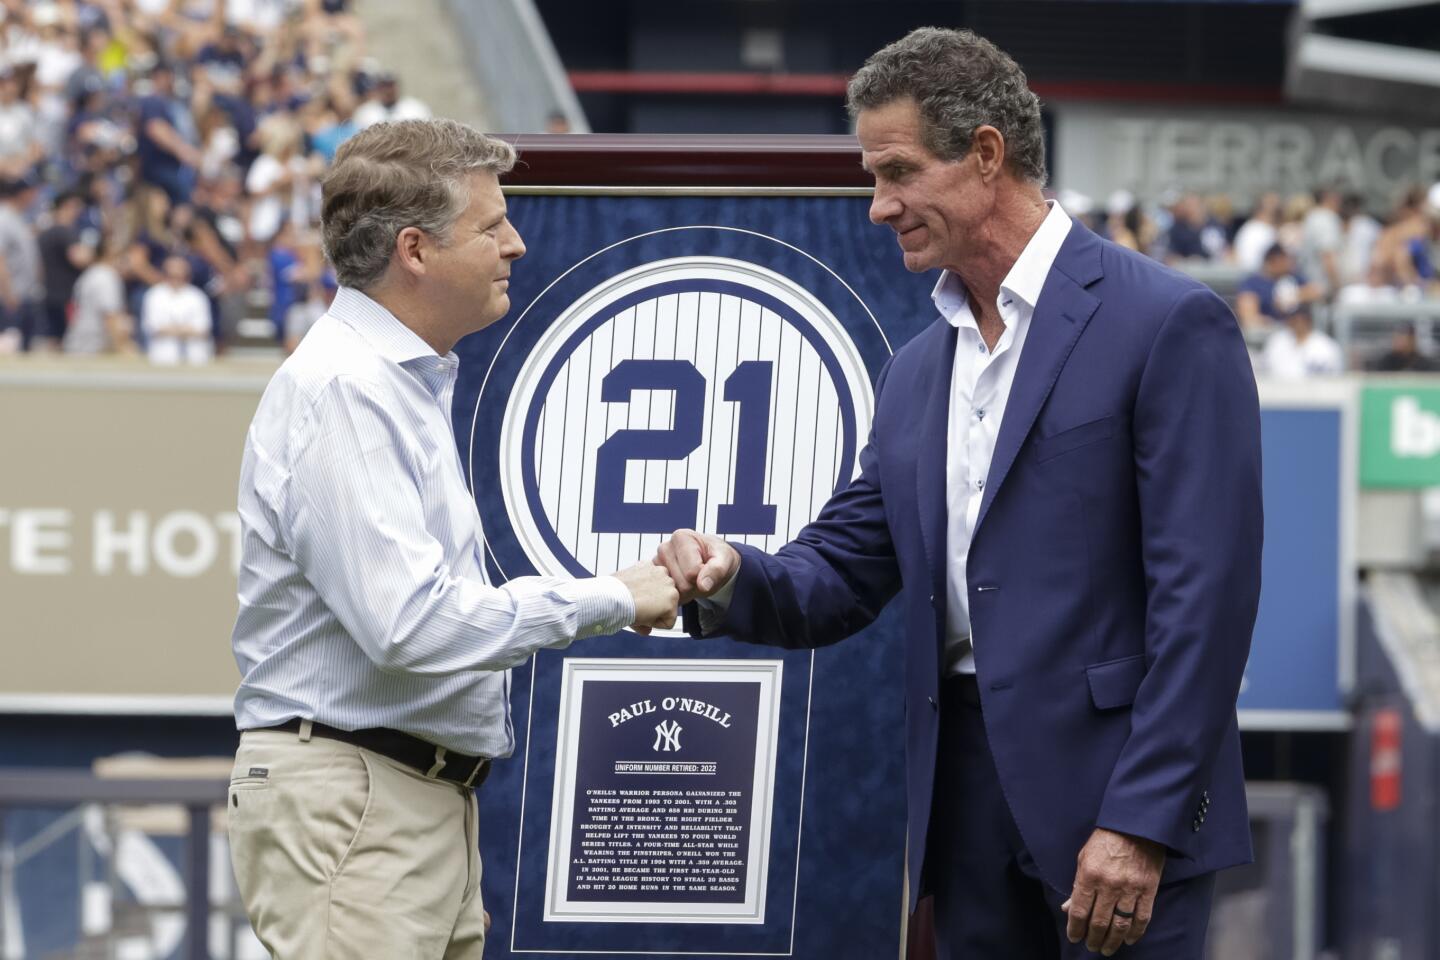 Yankees fans boo Hal Steinbrenner during Paul O'Neill ceremony : r/mlb